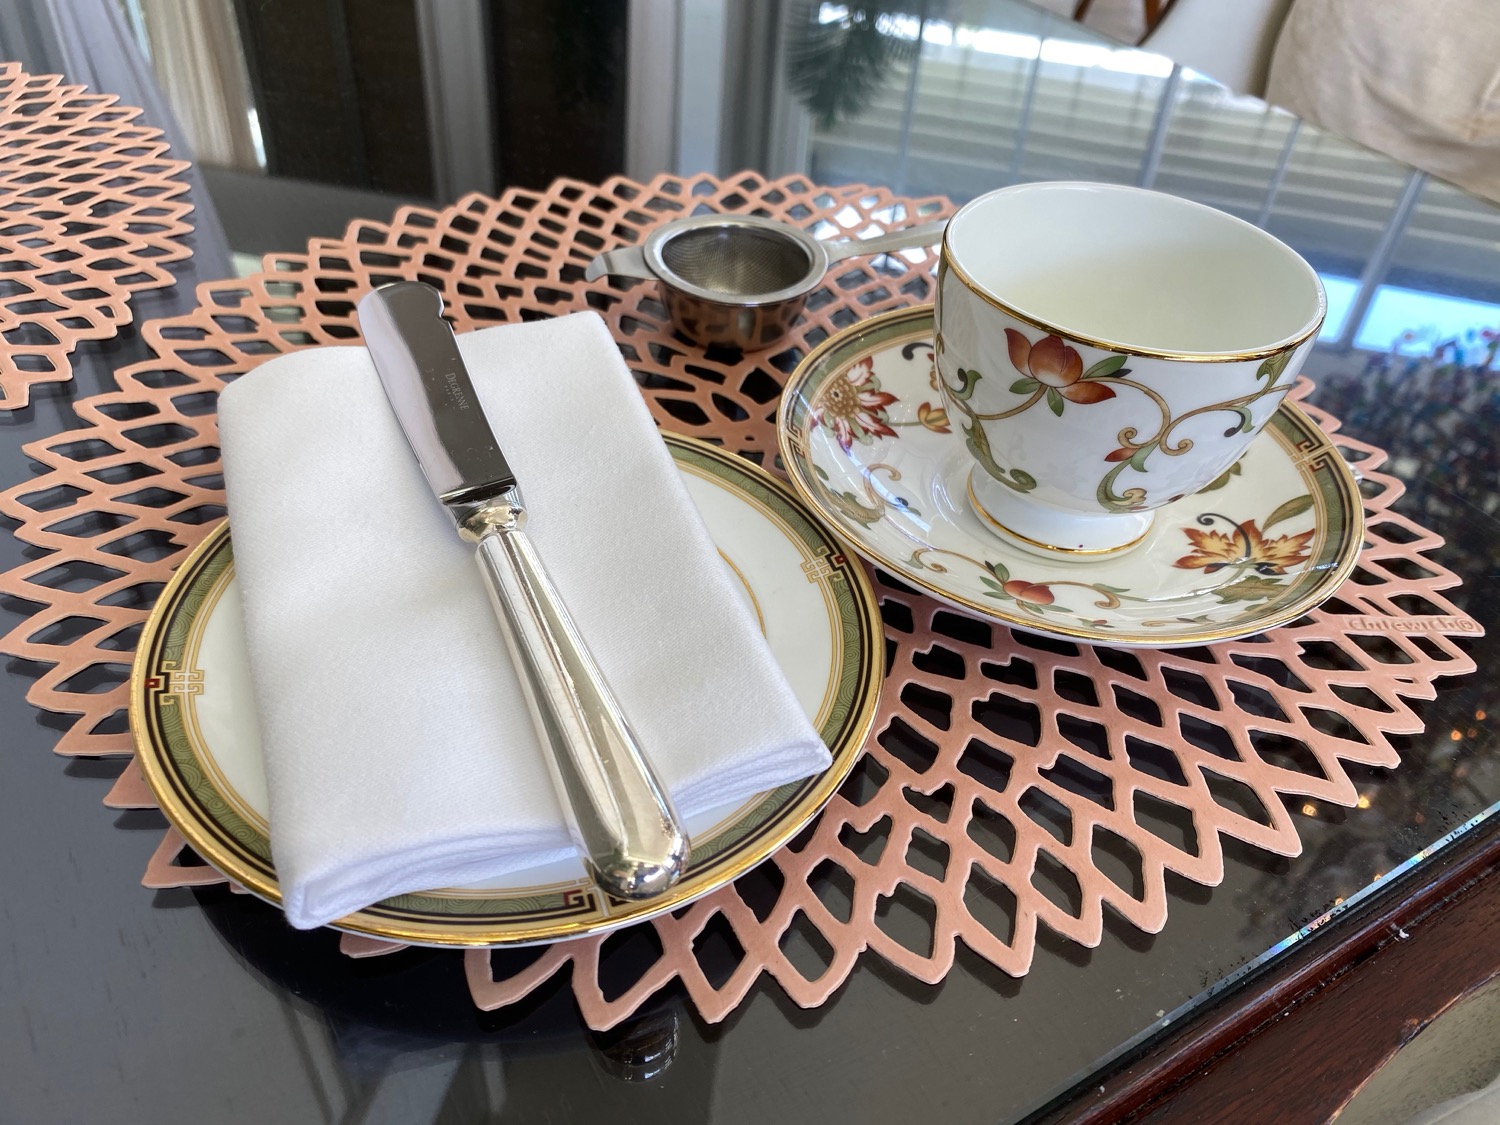 a teacup and saucer with a napkin and a knife on a table